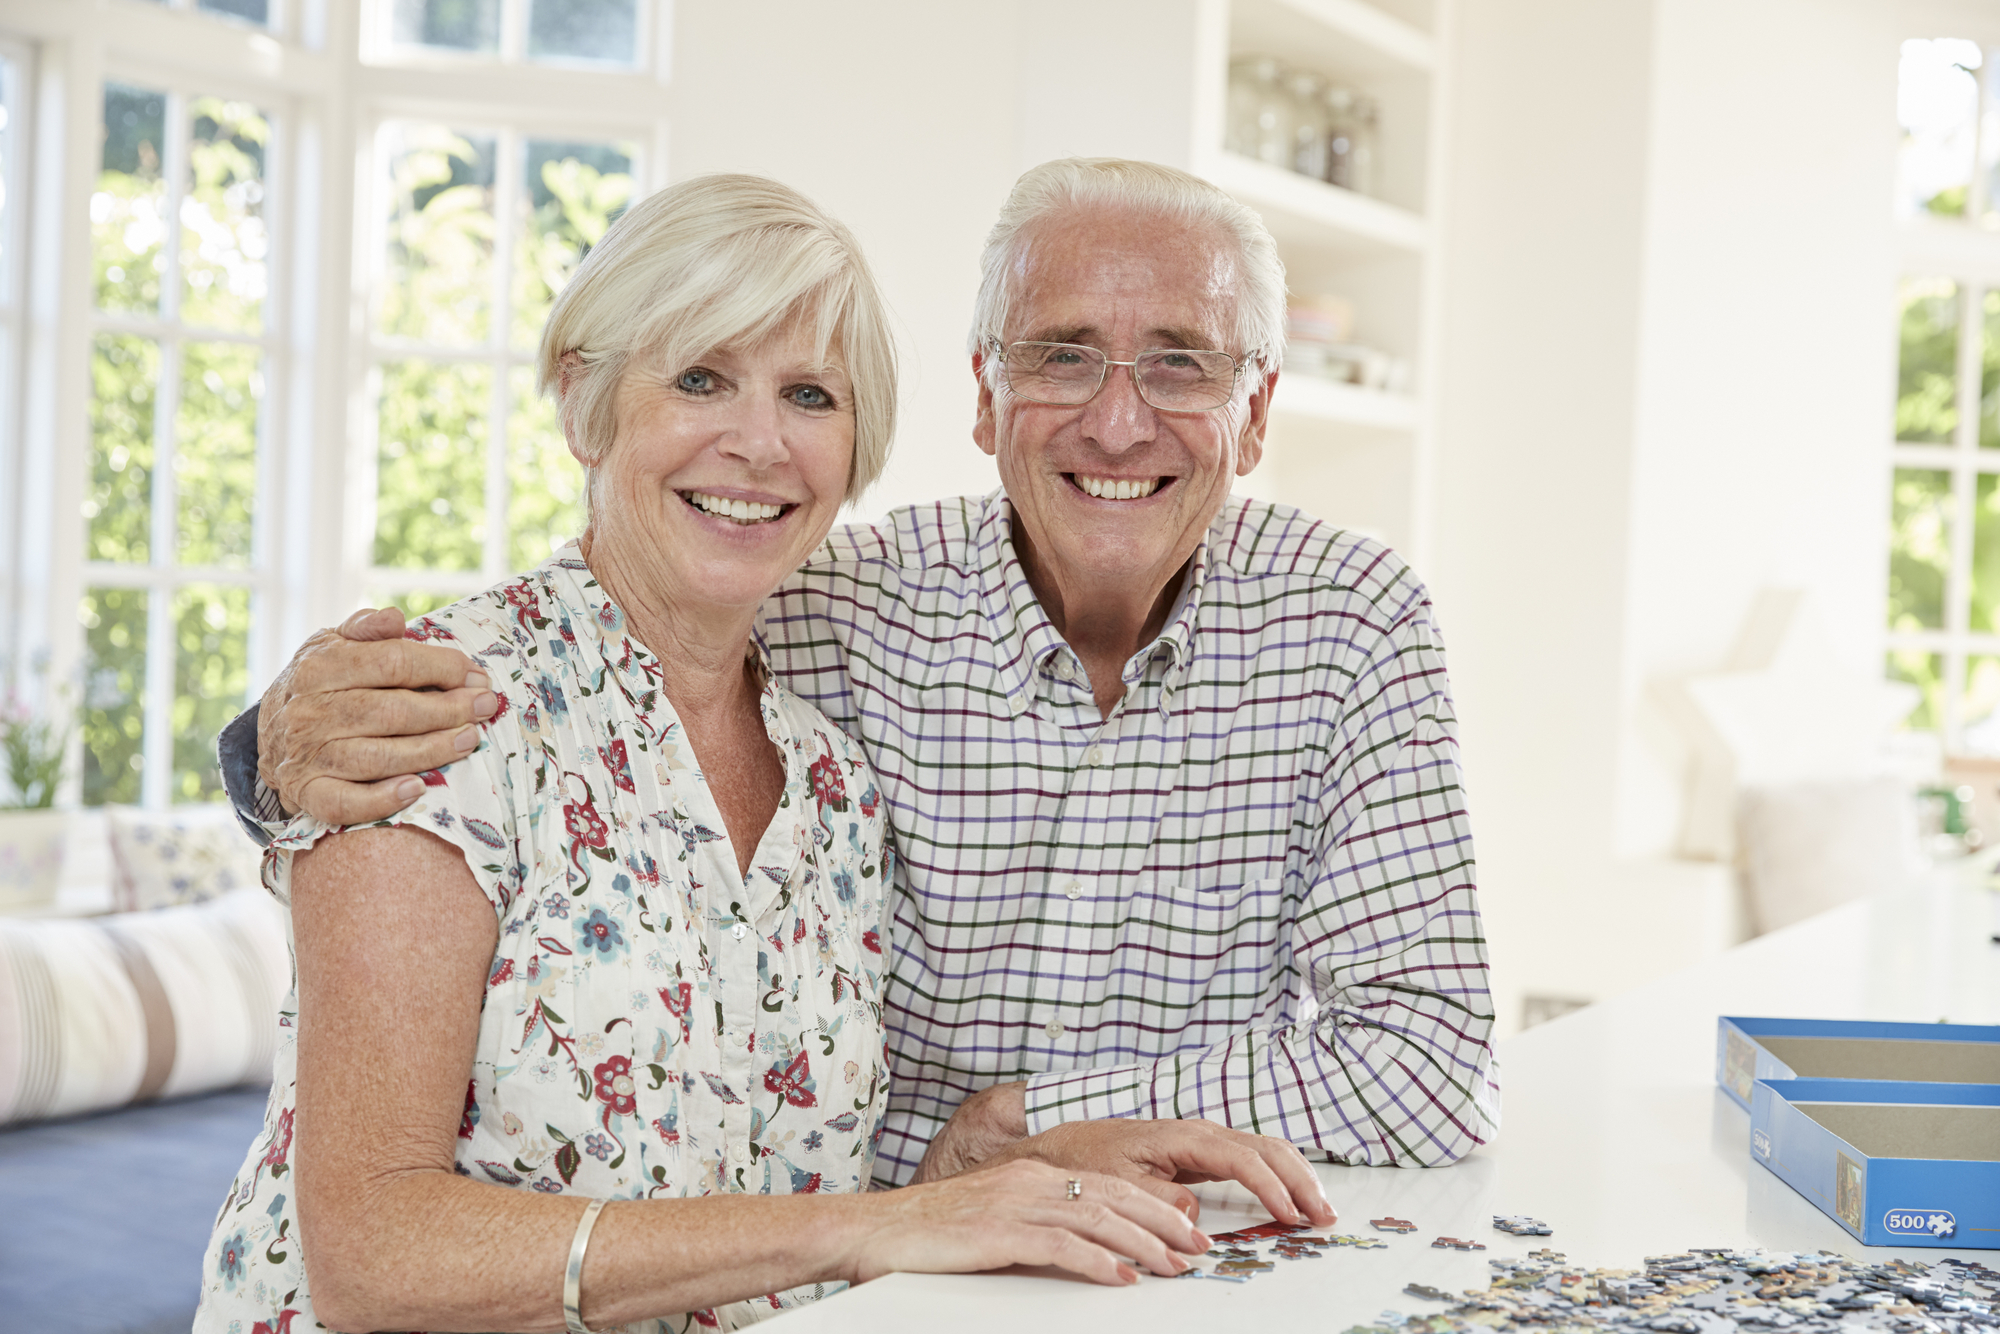 Learn about the importance of senior hobbies